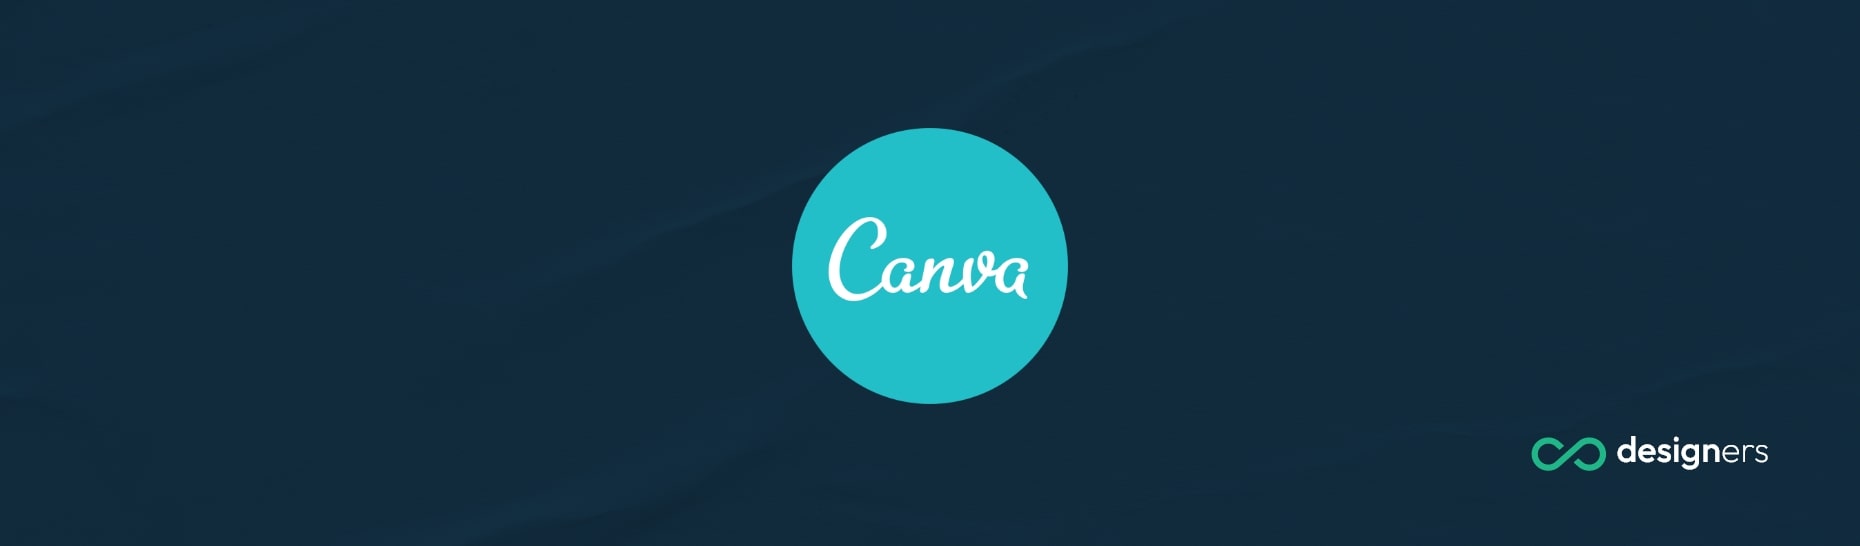 Does Canva Have Resume templates?